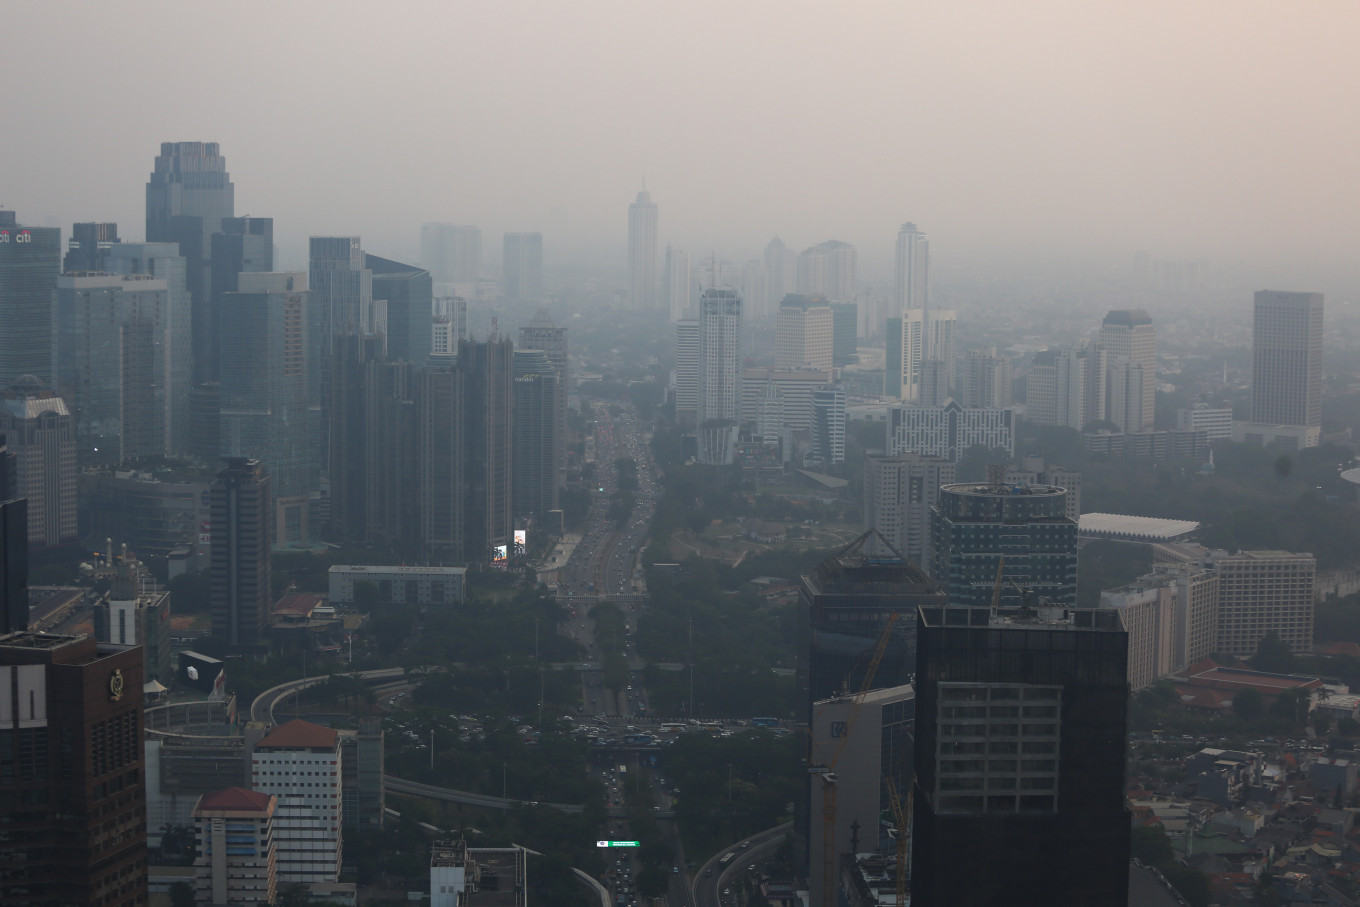 how to reduce air pollution in jakarta